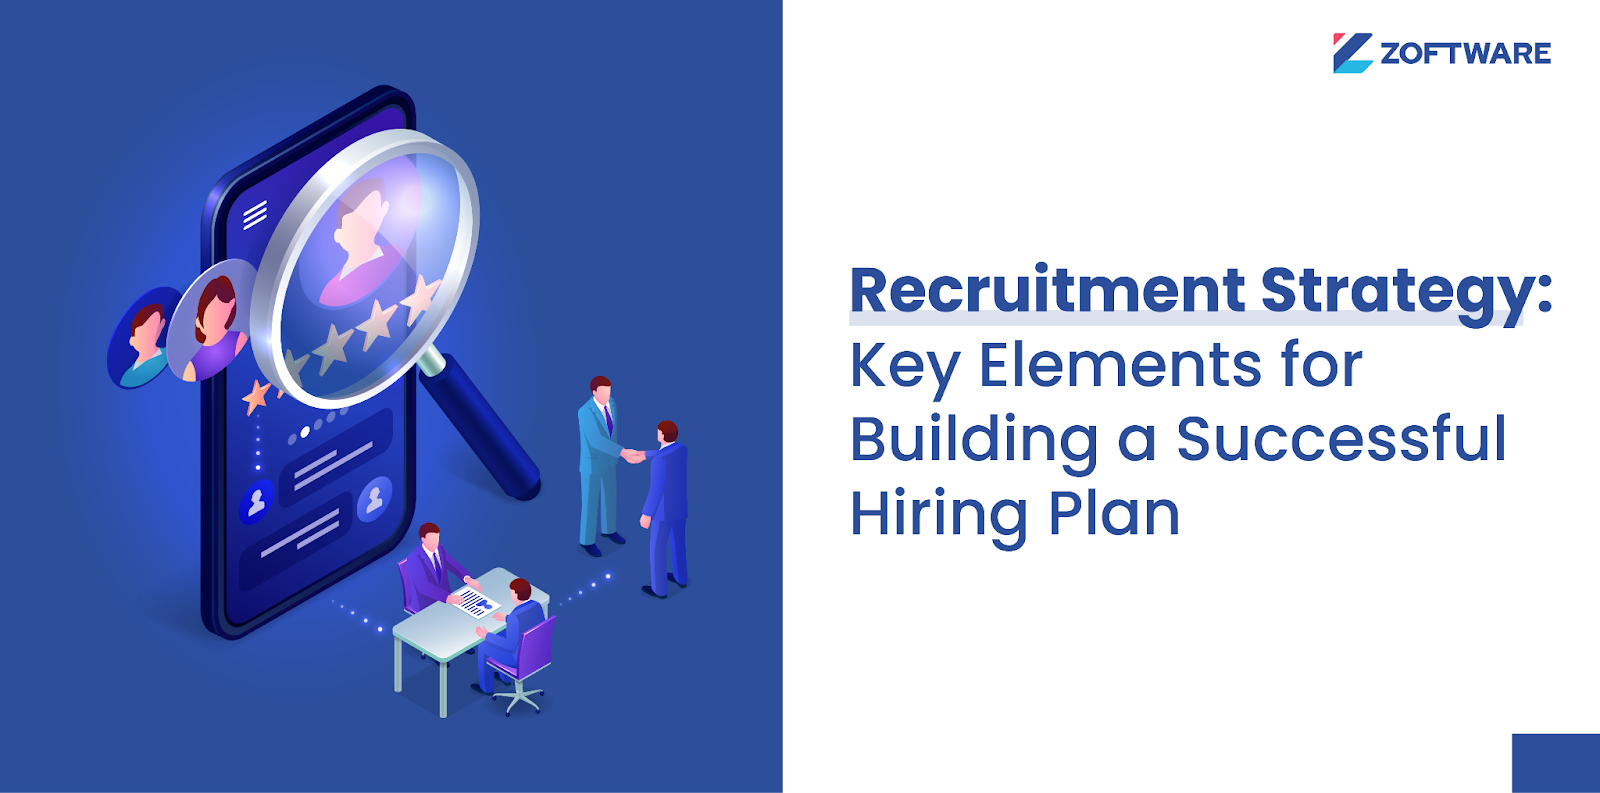 Recruitment Strategy: Key Elements for Building a Successful Hiring Plan